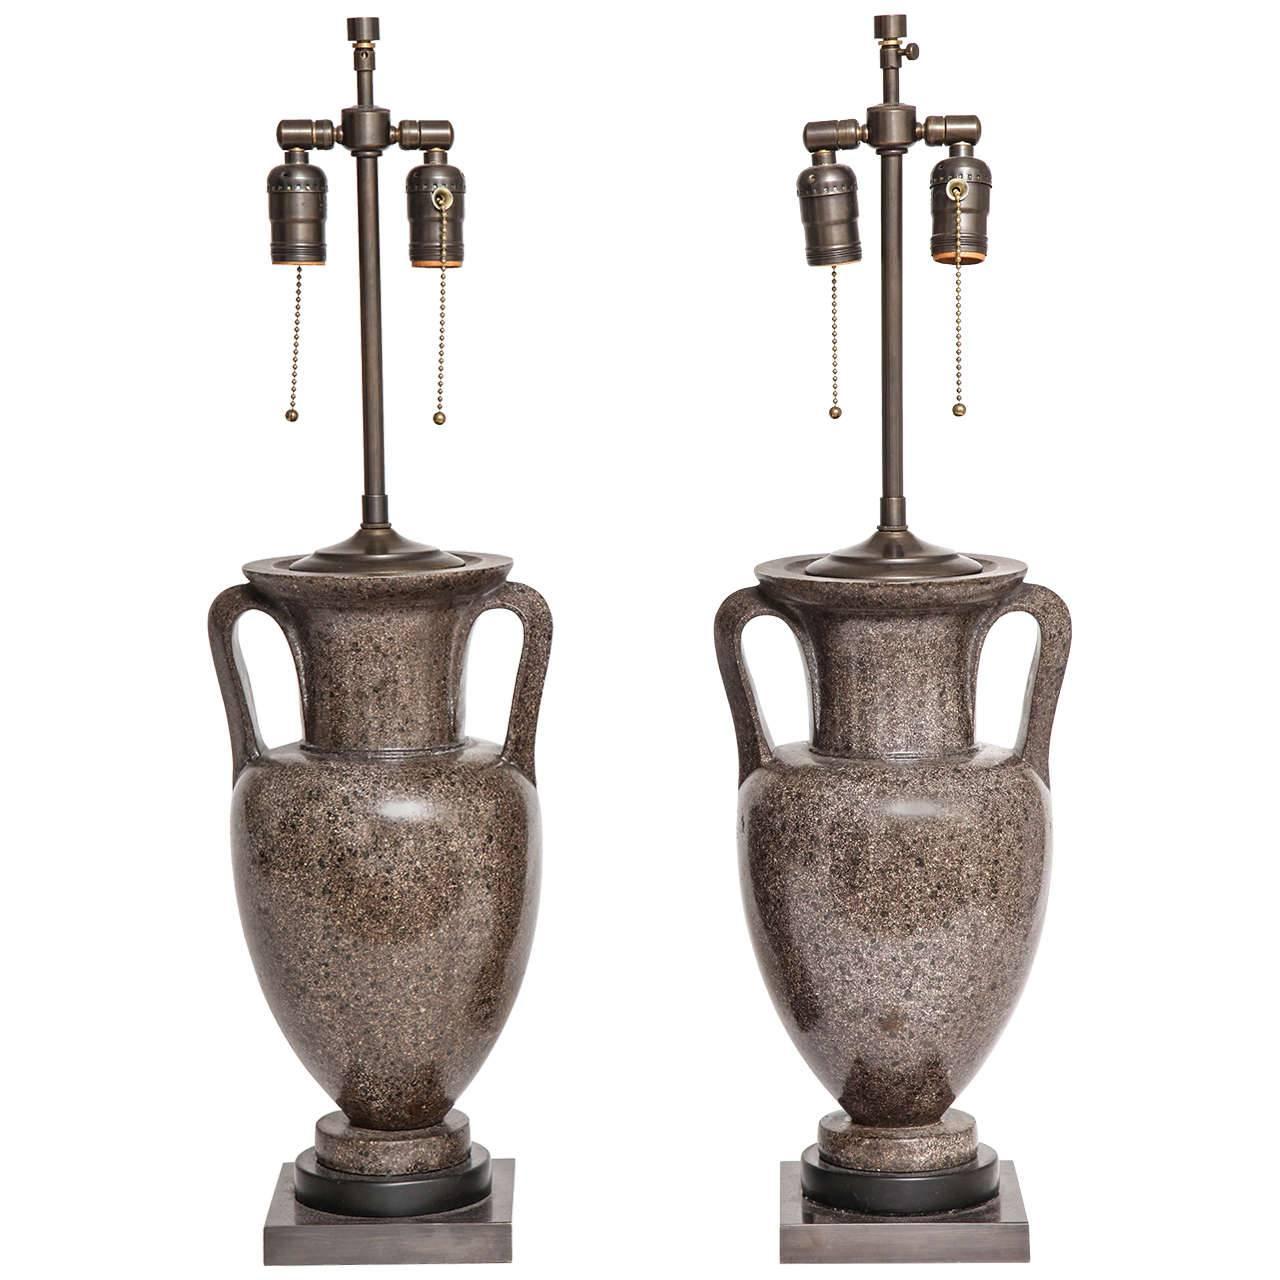 Pair of Italian Grand Tour Porphyry Urns Converted into Lamps, Early 1800s